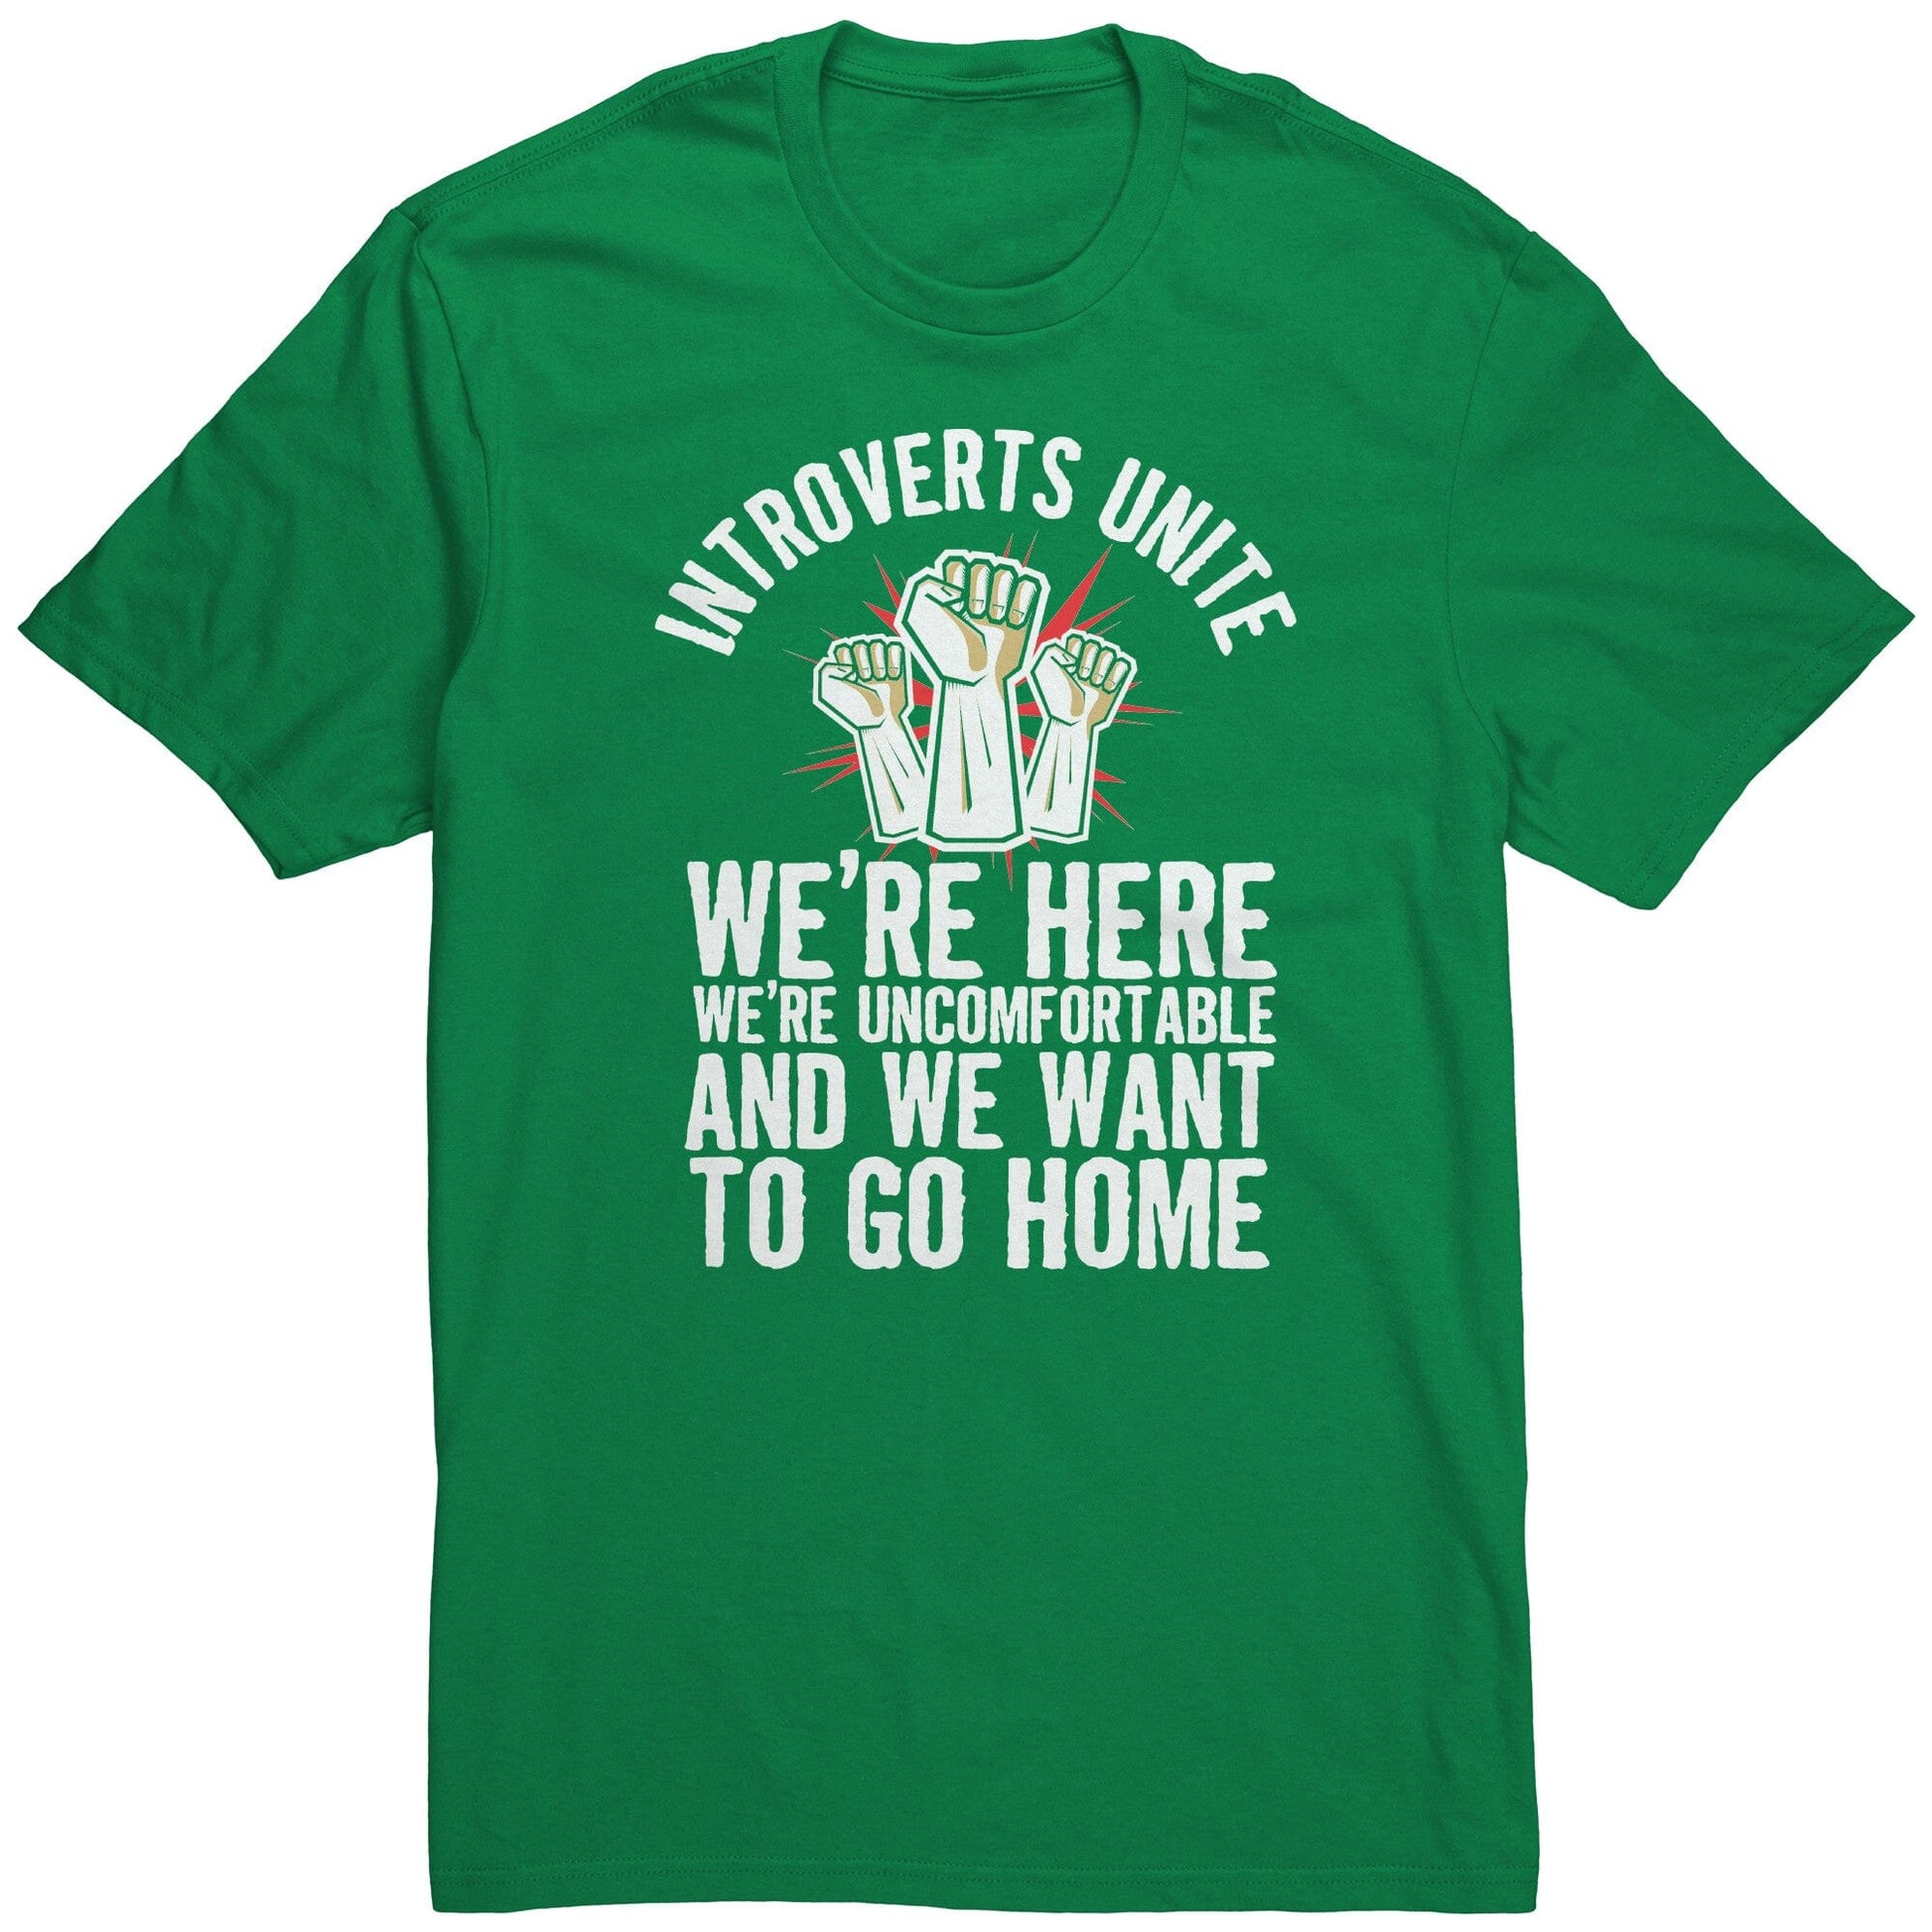 Funny "Introverts Unite - We're Here, We're Uncomfortable, and We Want To Go Home" Shirt Apparel Kelly Green S 